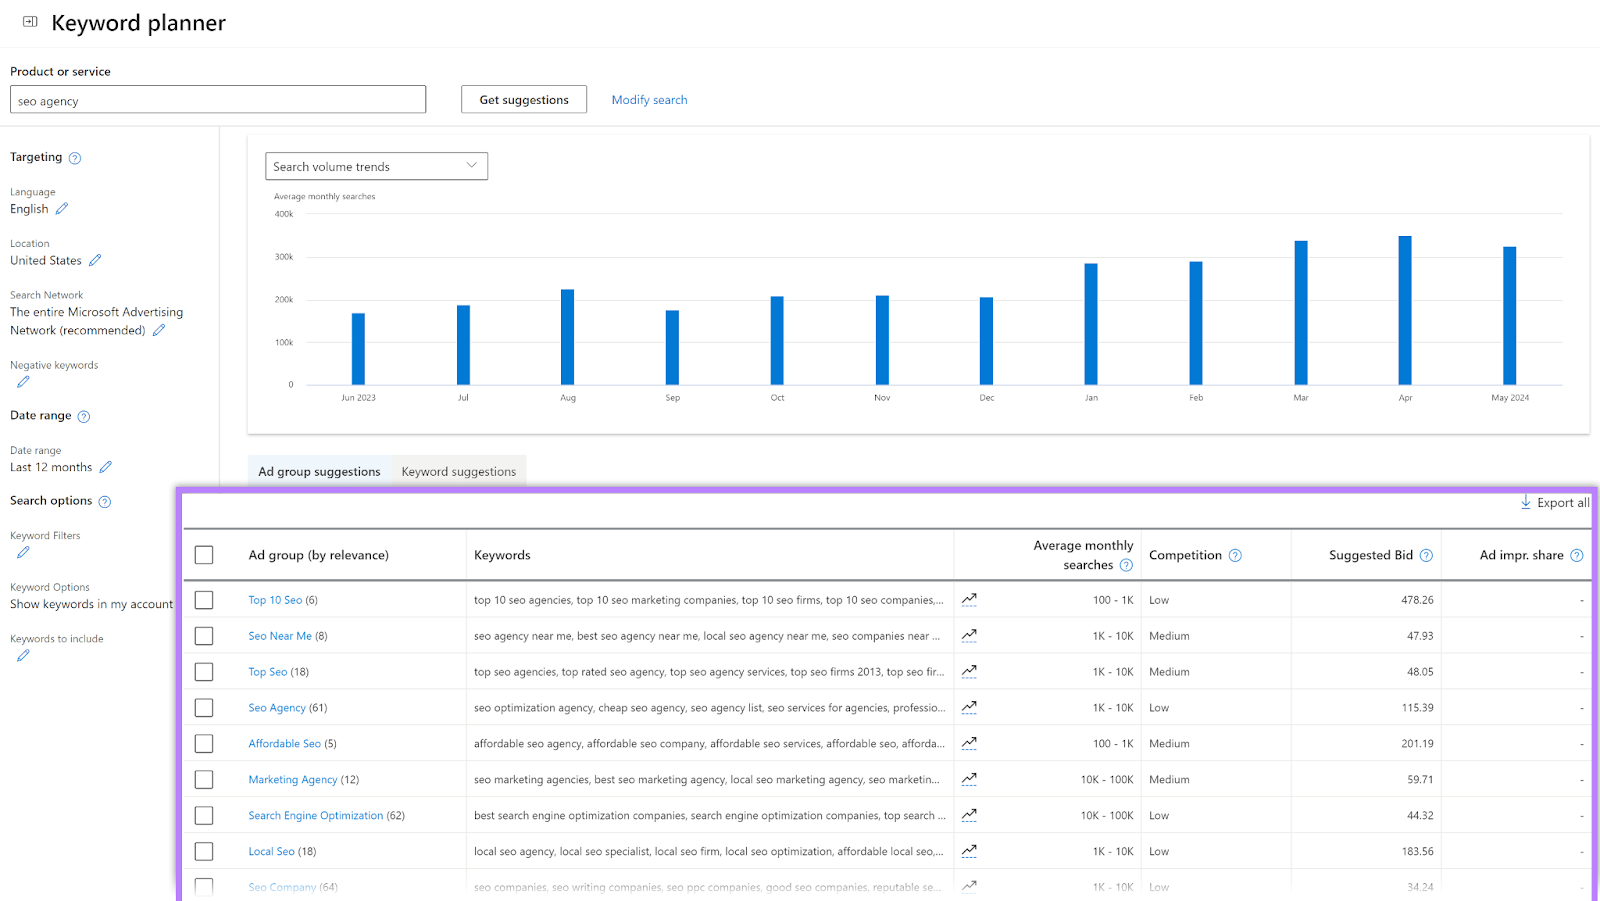 Keyword planner tool results showing trends and ad group suggestions.